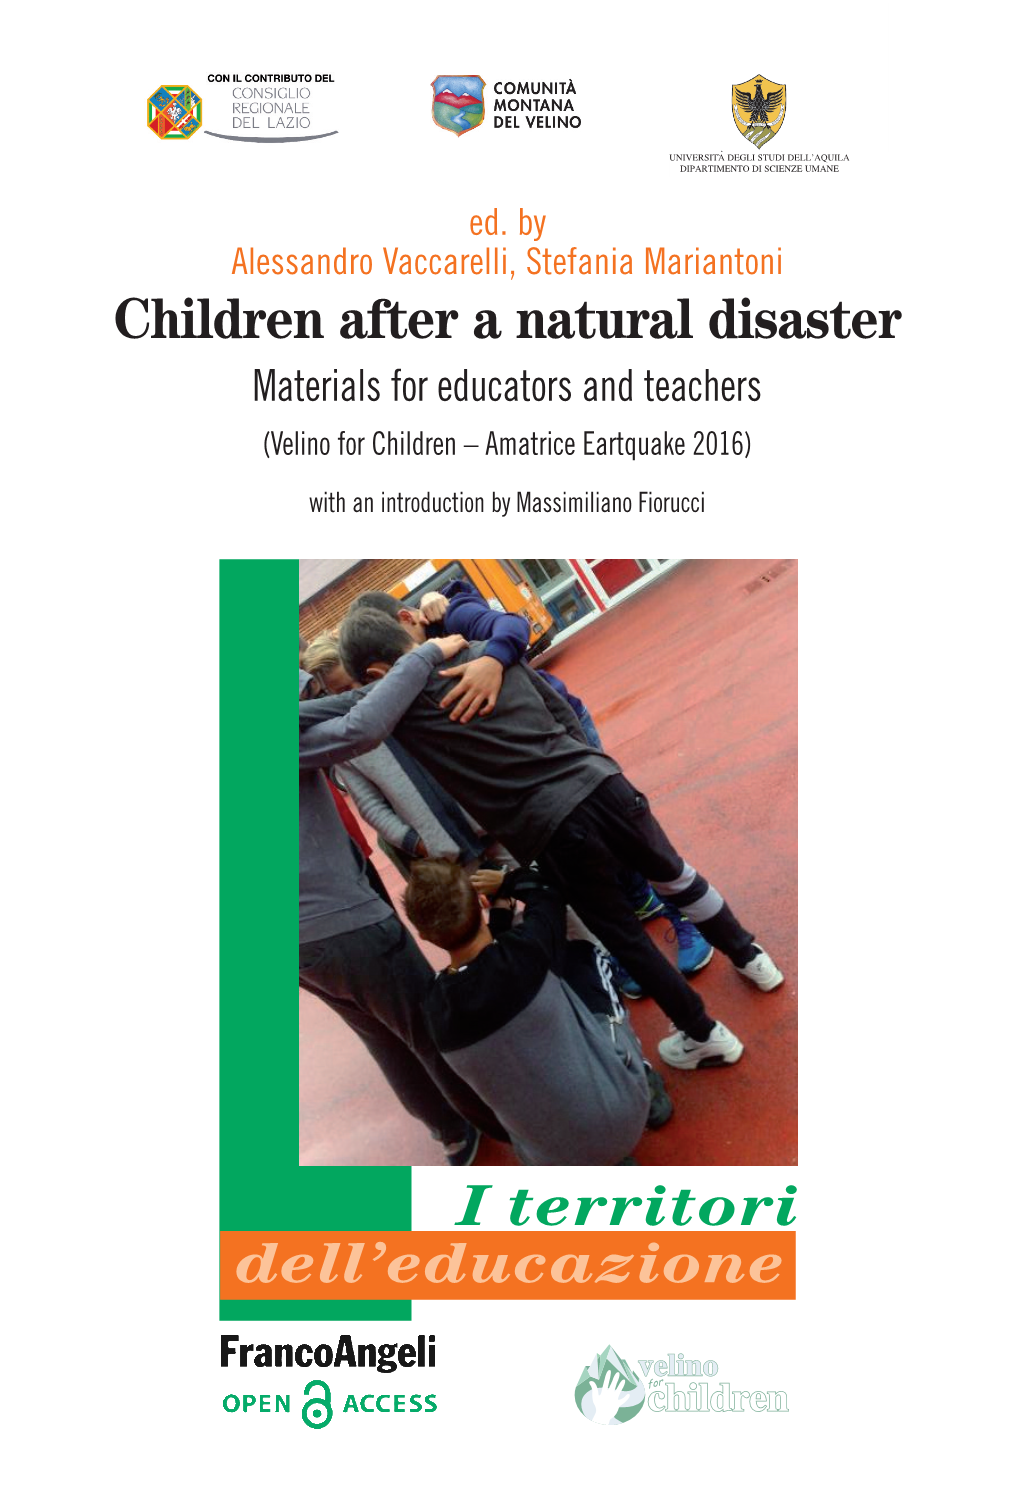 Children After a Natural Disaster Children and Teenagers, Who Present As the Most Vulnerable Subjects in the Communities Affected